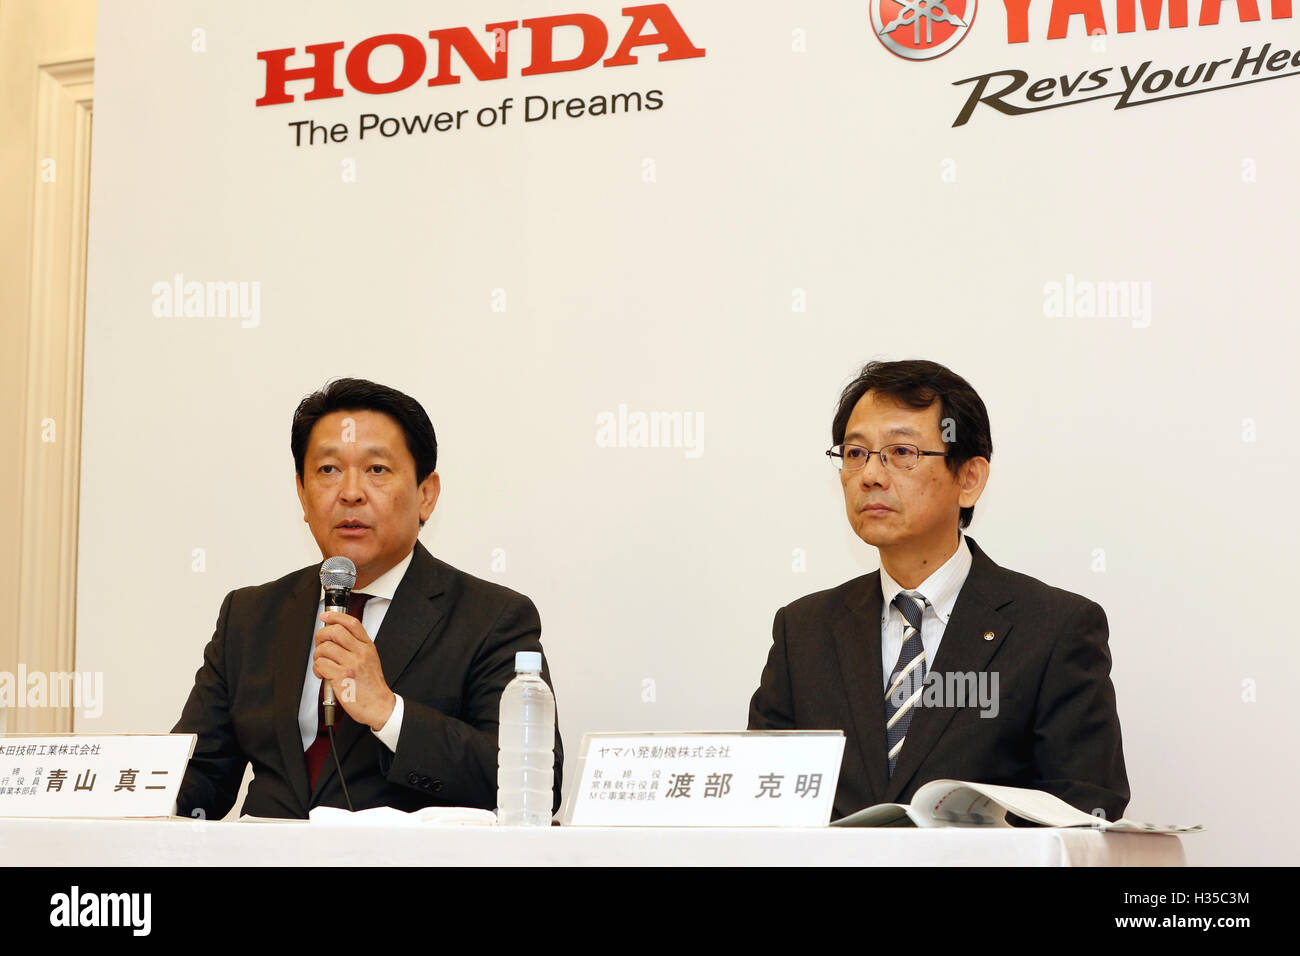 Honda Motor Operating Officer and Director Shinji Aoyama, left, and Yamaha Motor Managing Executive Officer and Director Katsuaki Watanabe attends a joint press conference in Tokyo, Japan on October 5, 2016. Japanese auto majors Honda and Yamaha announced they have started talks toward a business tie-up in the development and production of small scooters. © Yosuke Tanaka/AFLO/Alamy Live News Stock Photo